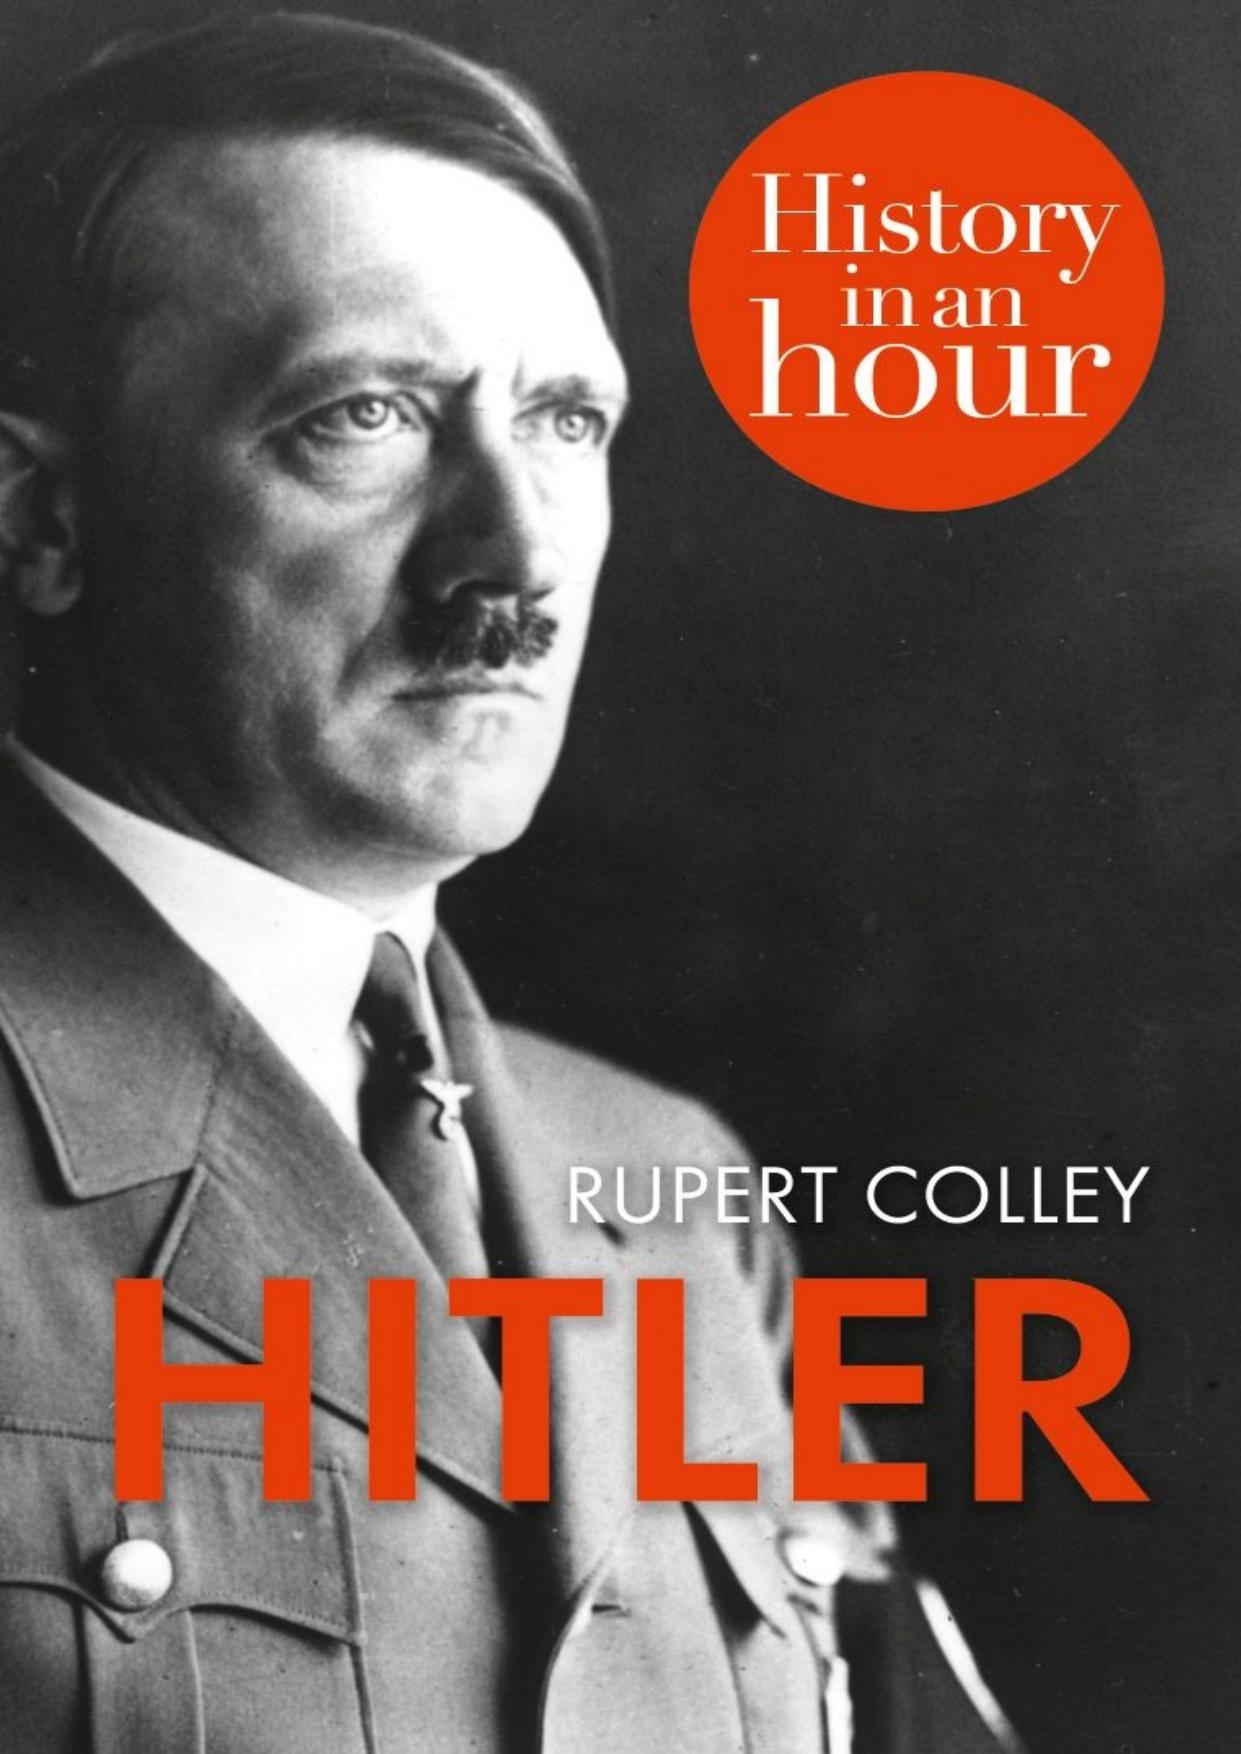 Hitler: History in an Hour by Rupert Colley